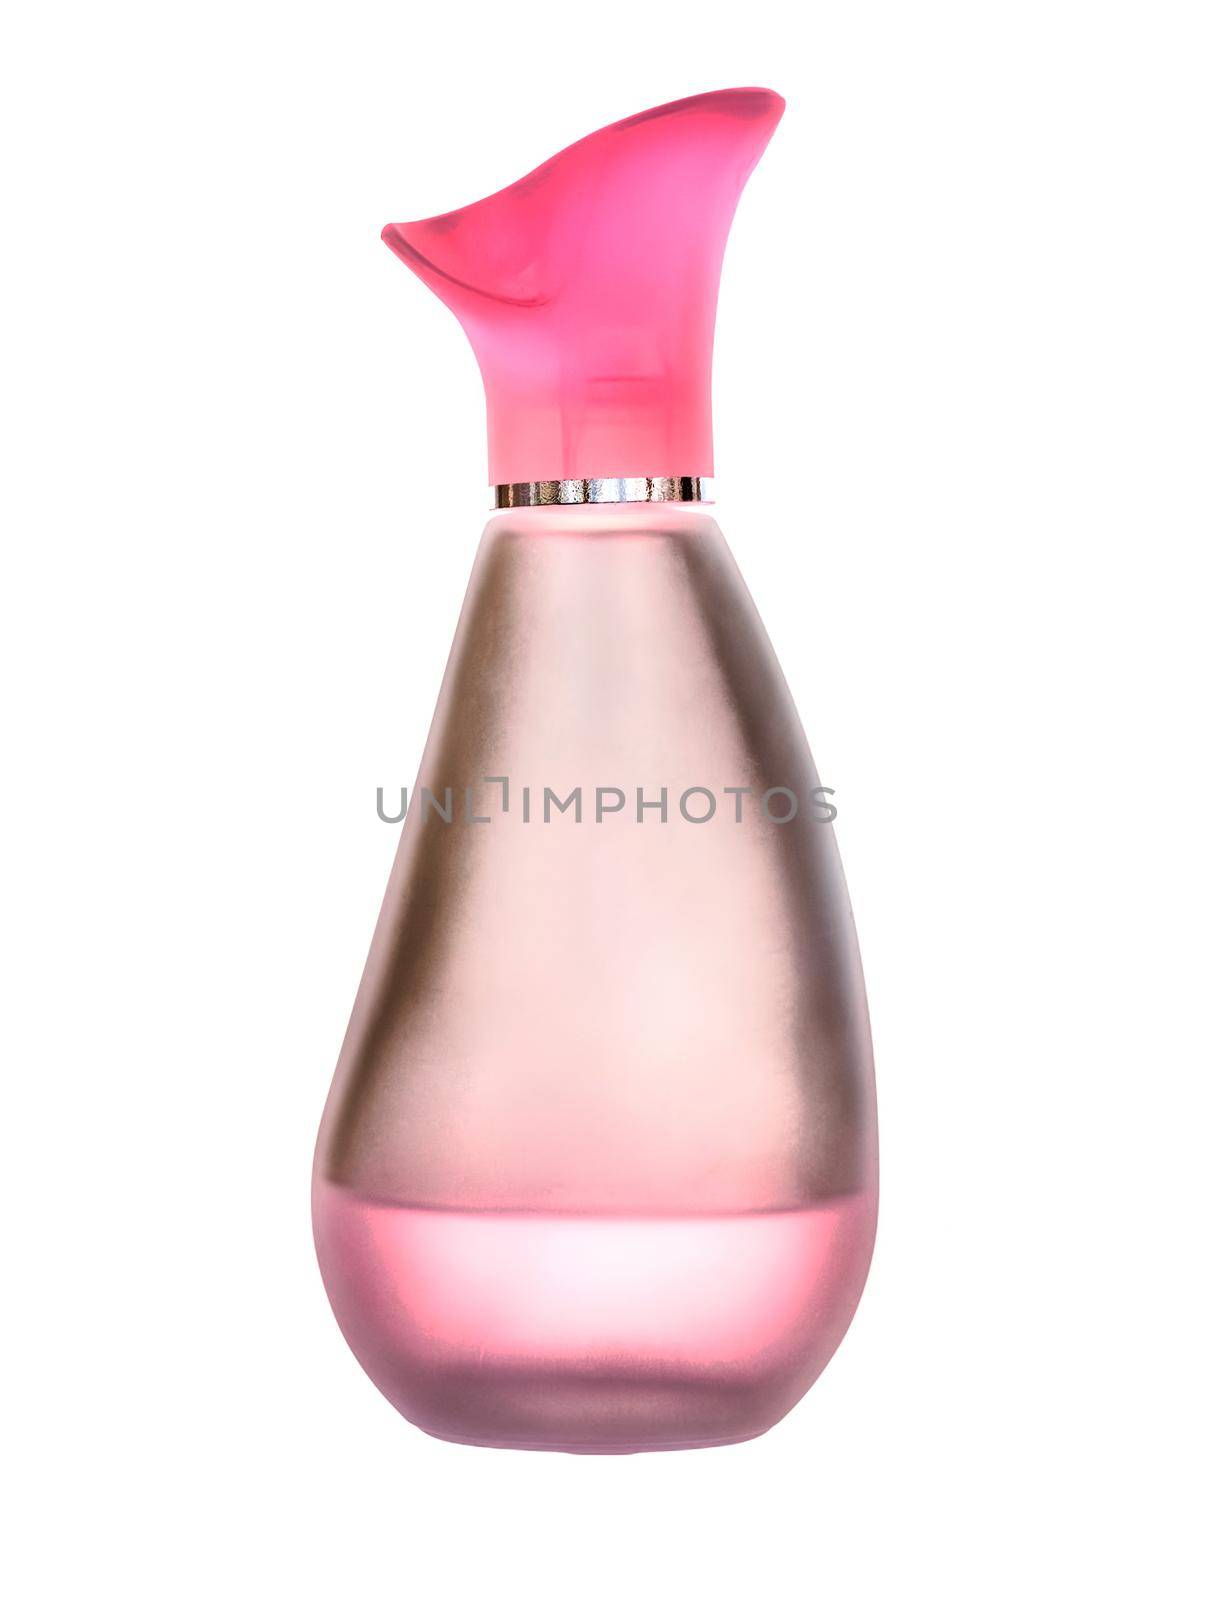 a bottle of perfume for Women, almost empty on white background by Roberto